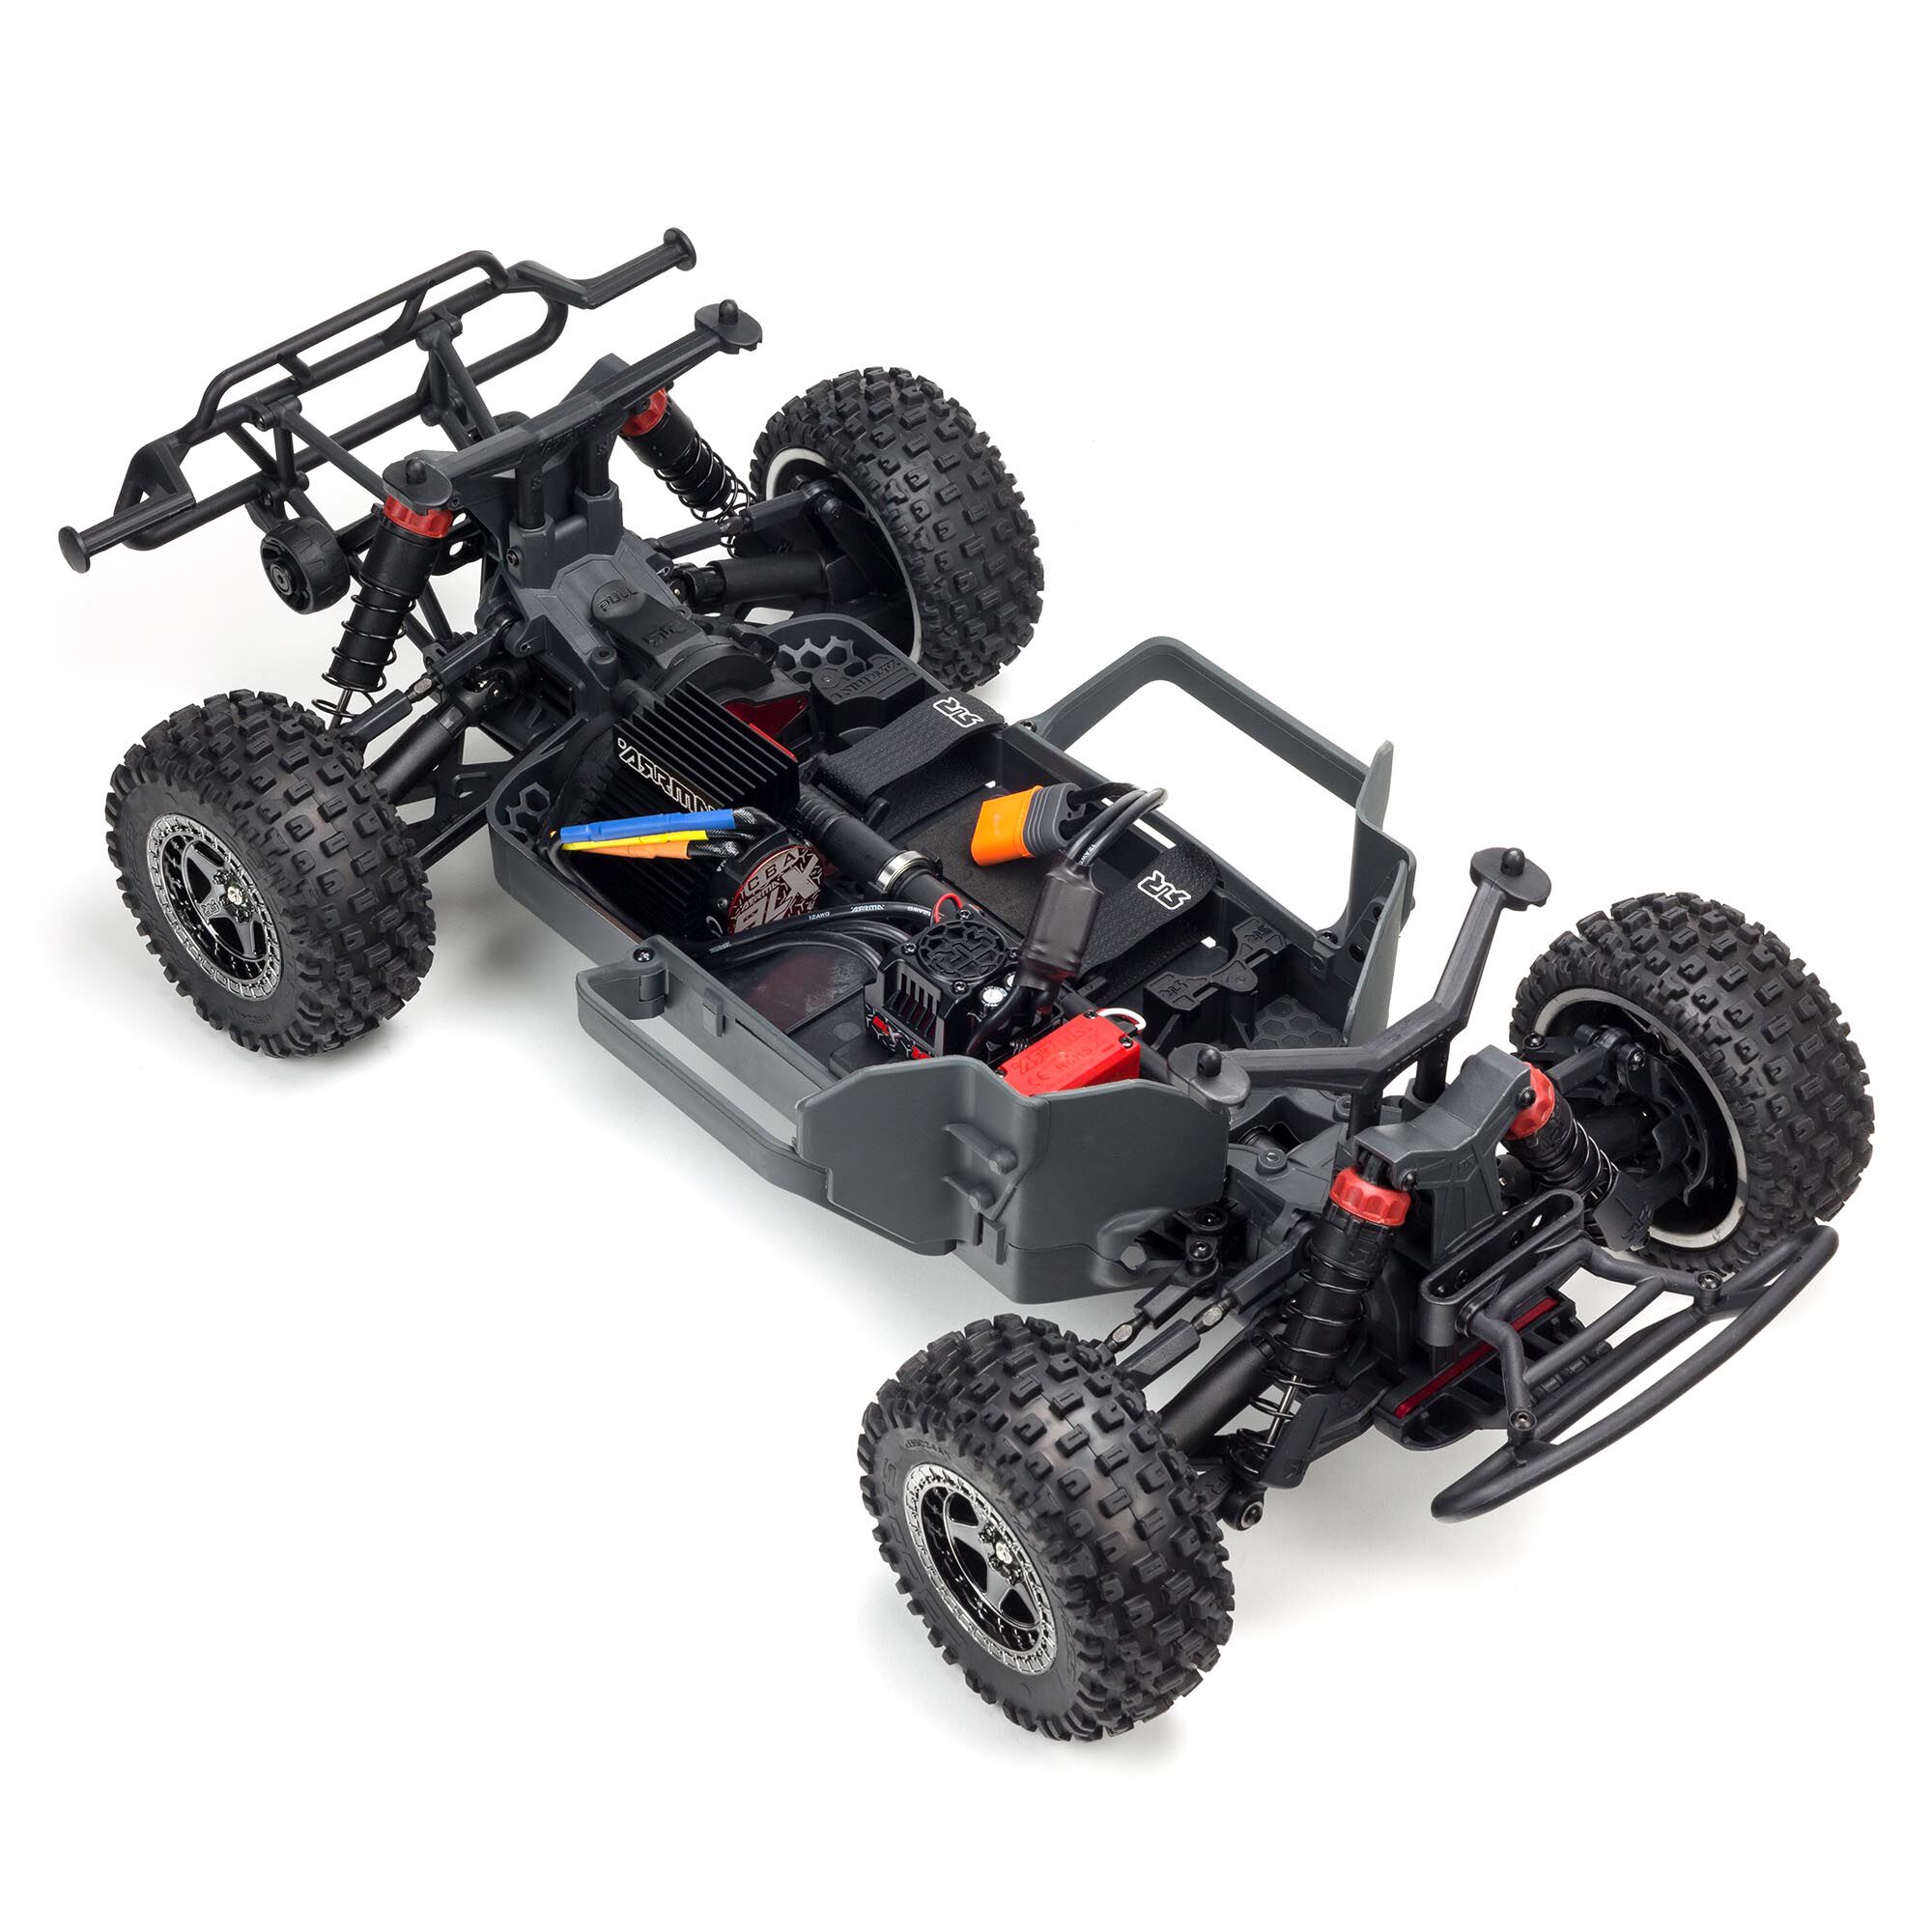 ARRMA 1/10 SENTON 3S BLX 4WD Brushless Short Course Truck with